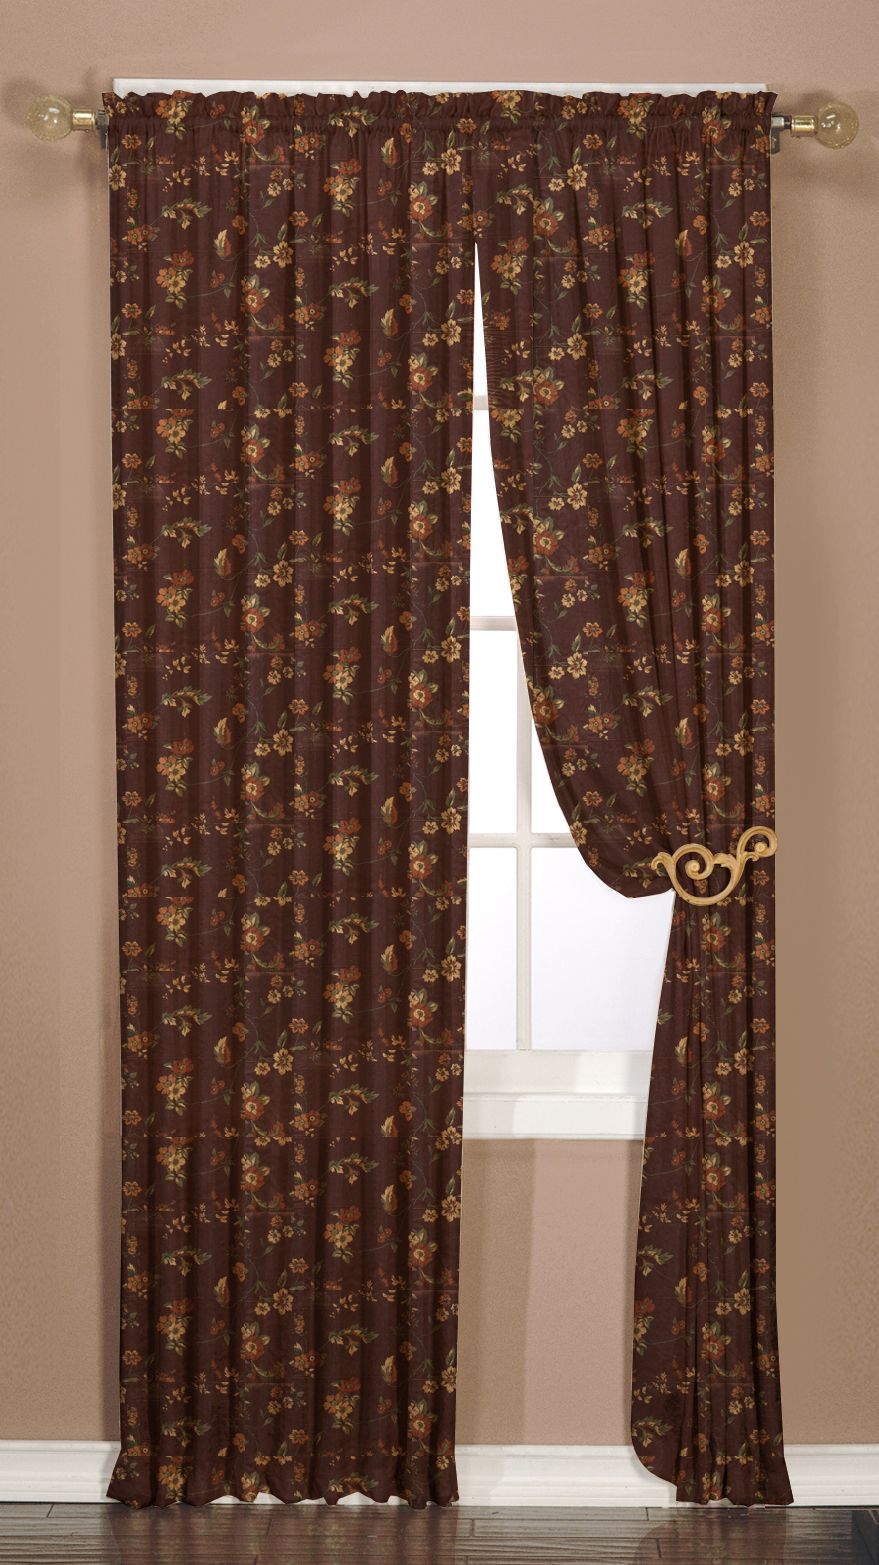 Essential Home Hanford Crushed Faux Silk Panel - Chocolate